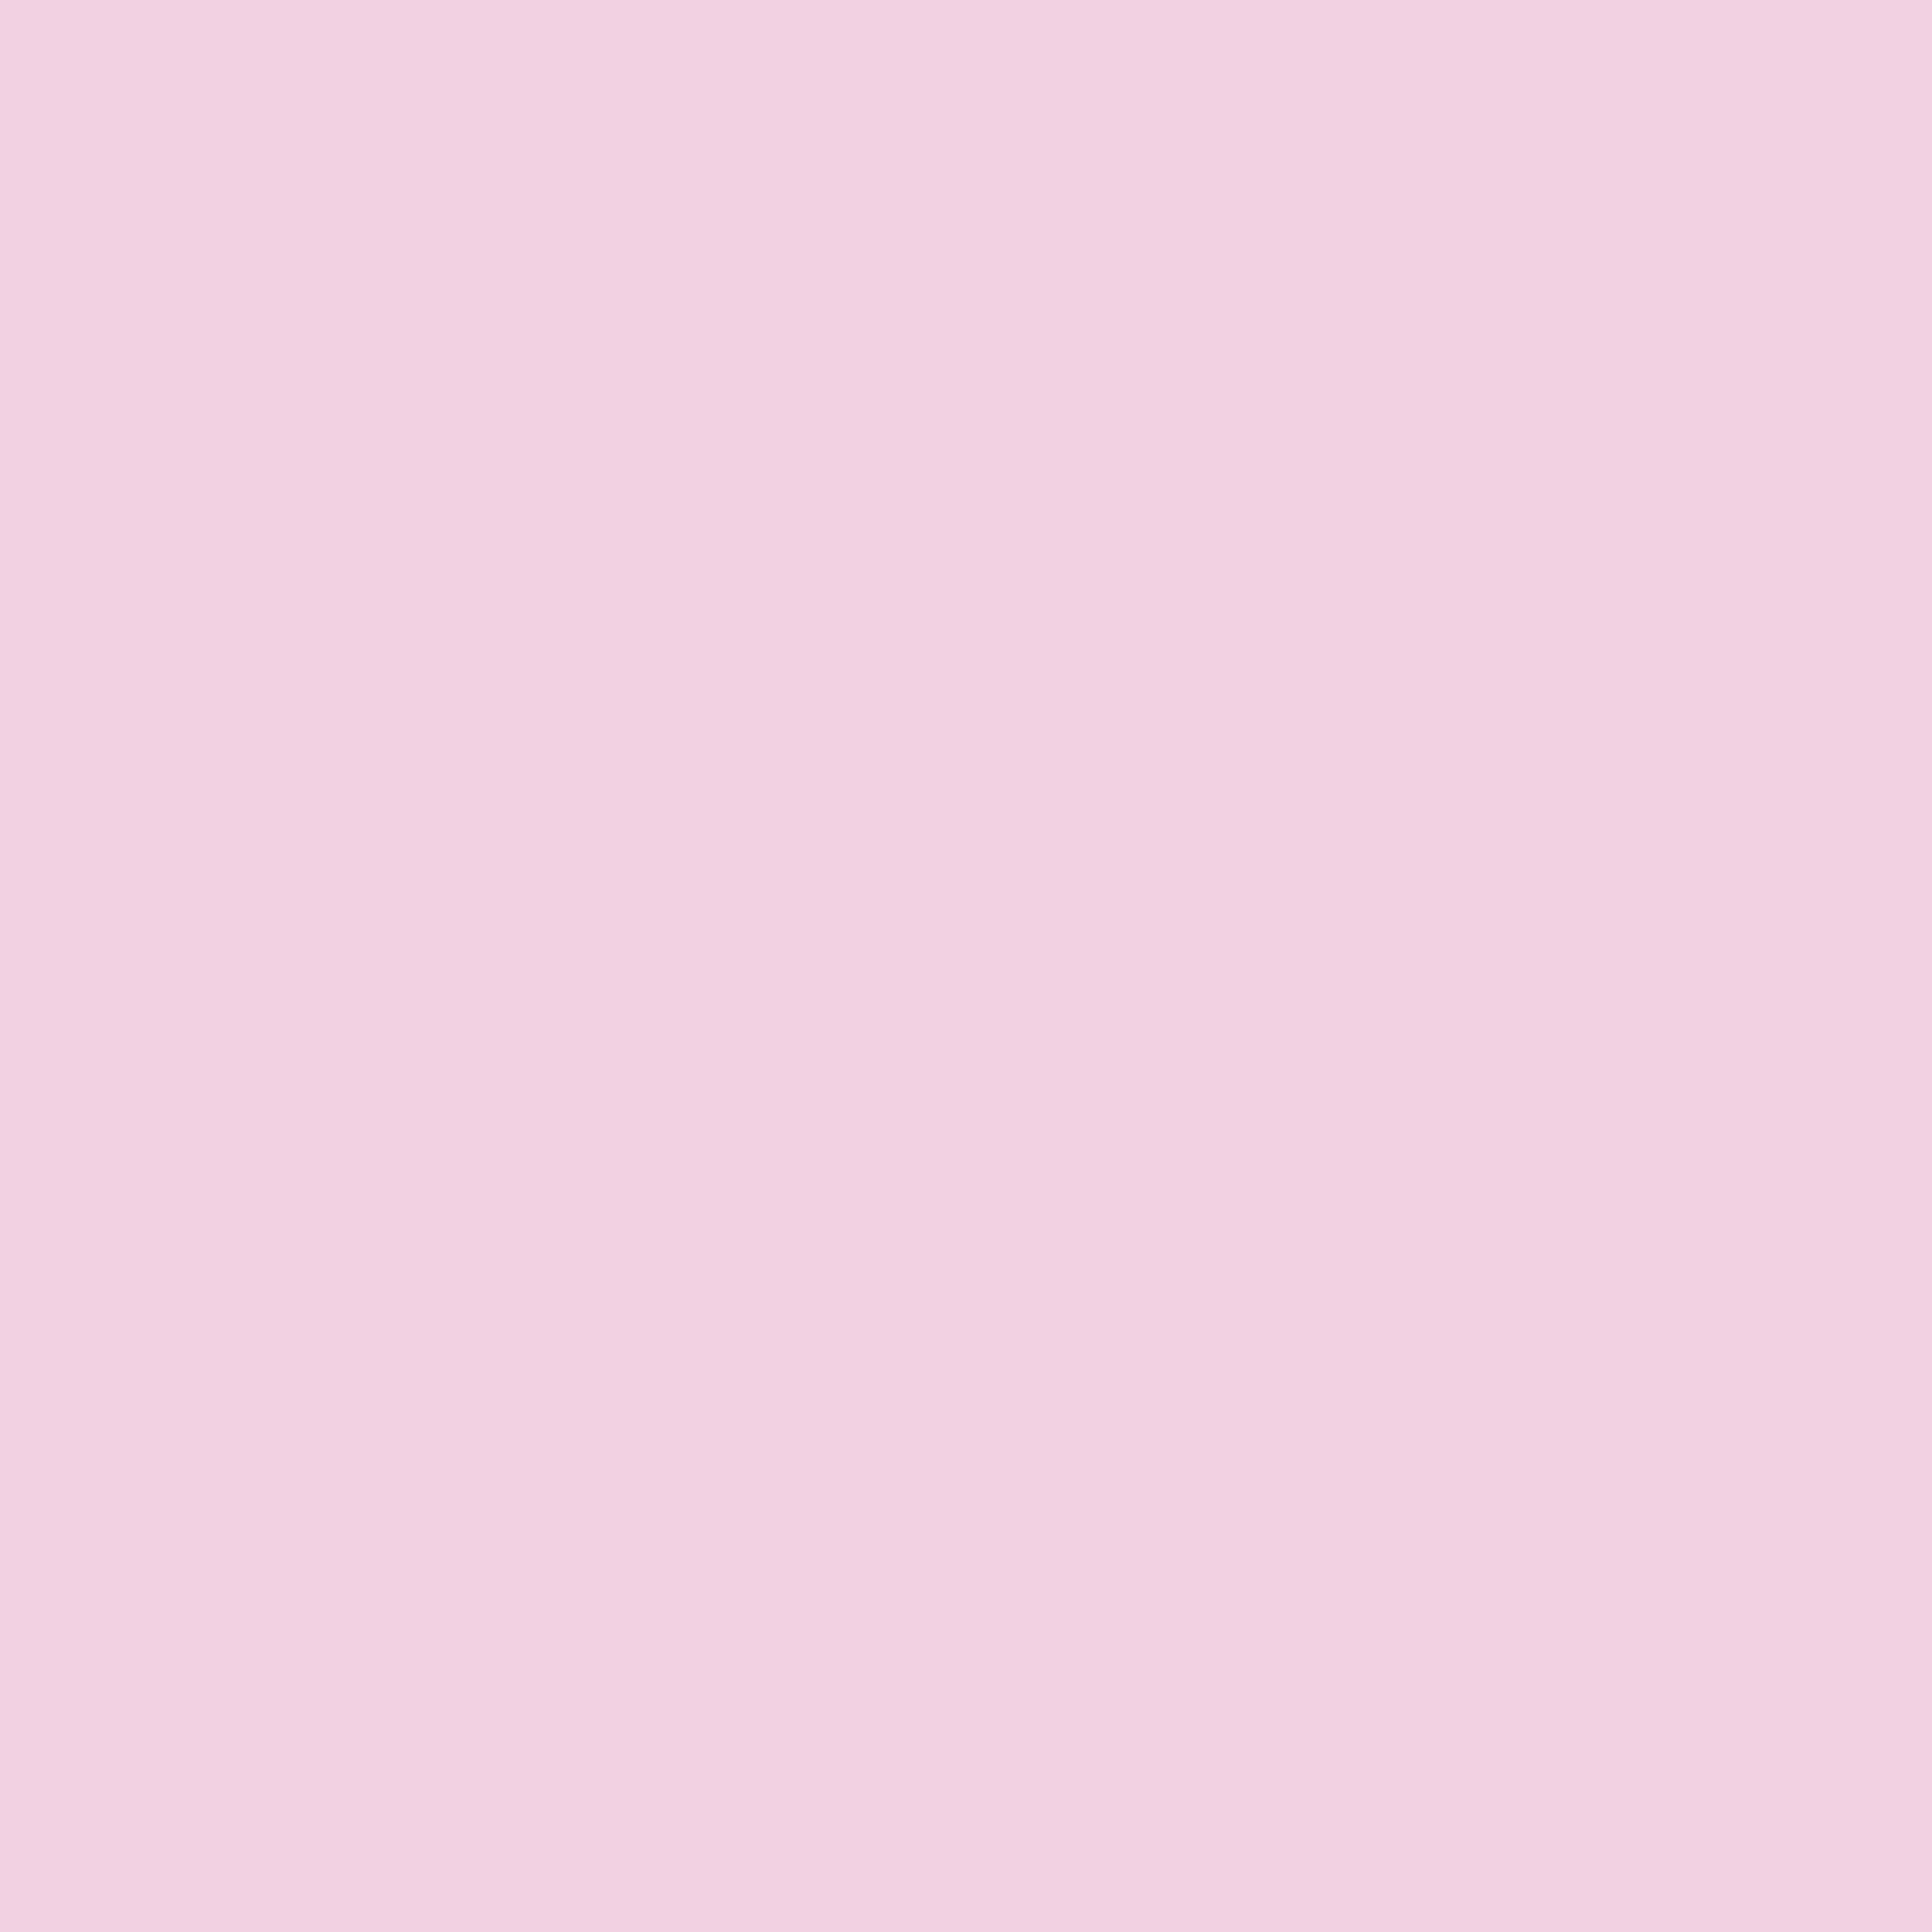 A square of pale pink